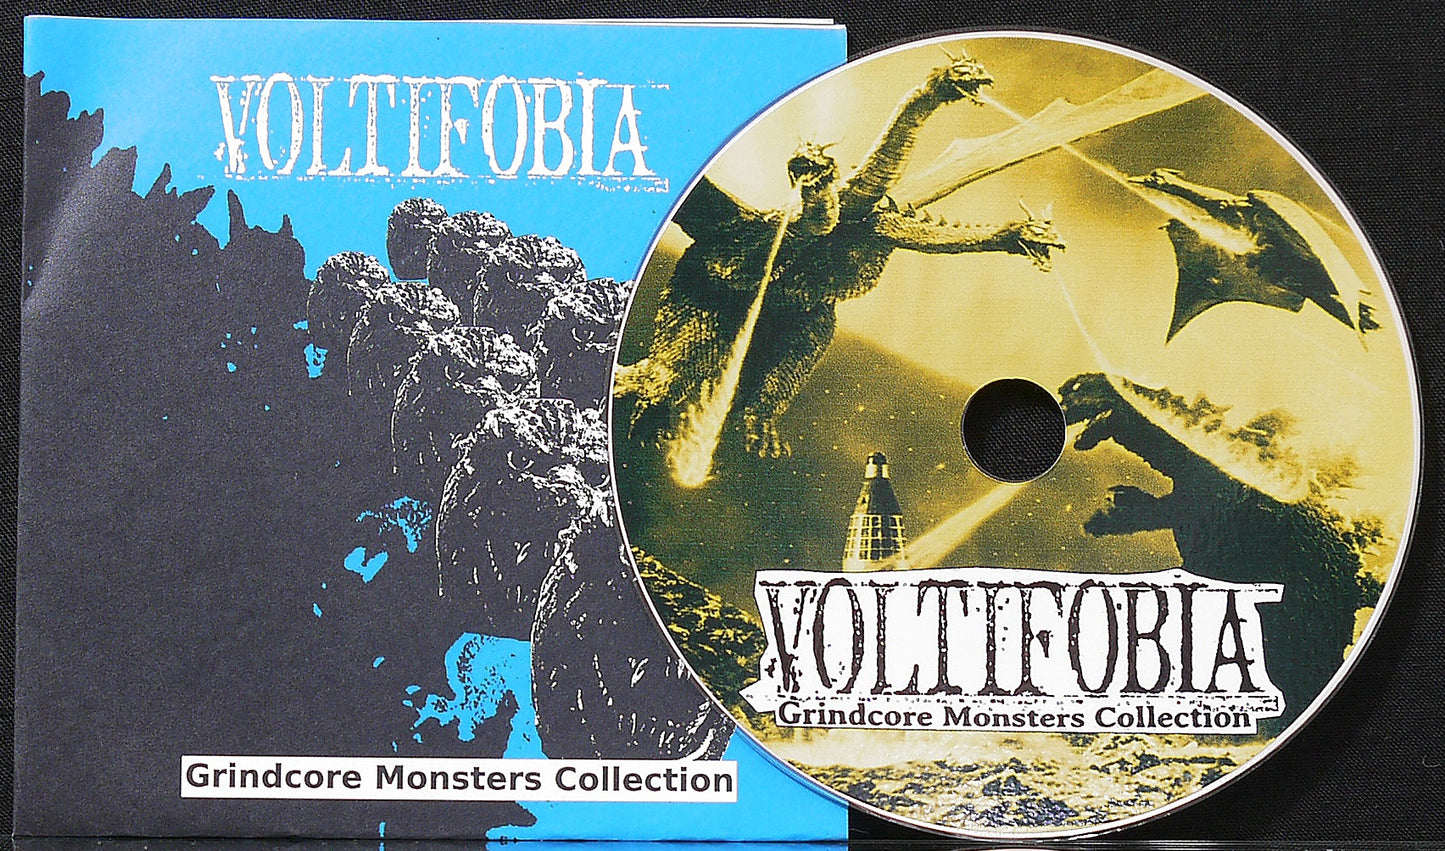 VOLTIFOBIA - Grindcore Monsters Collection ProCDr